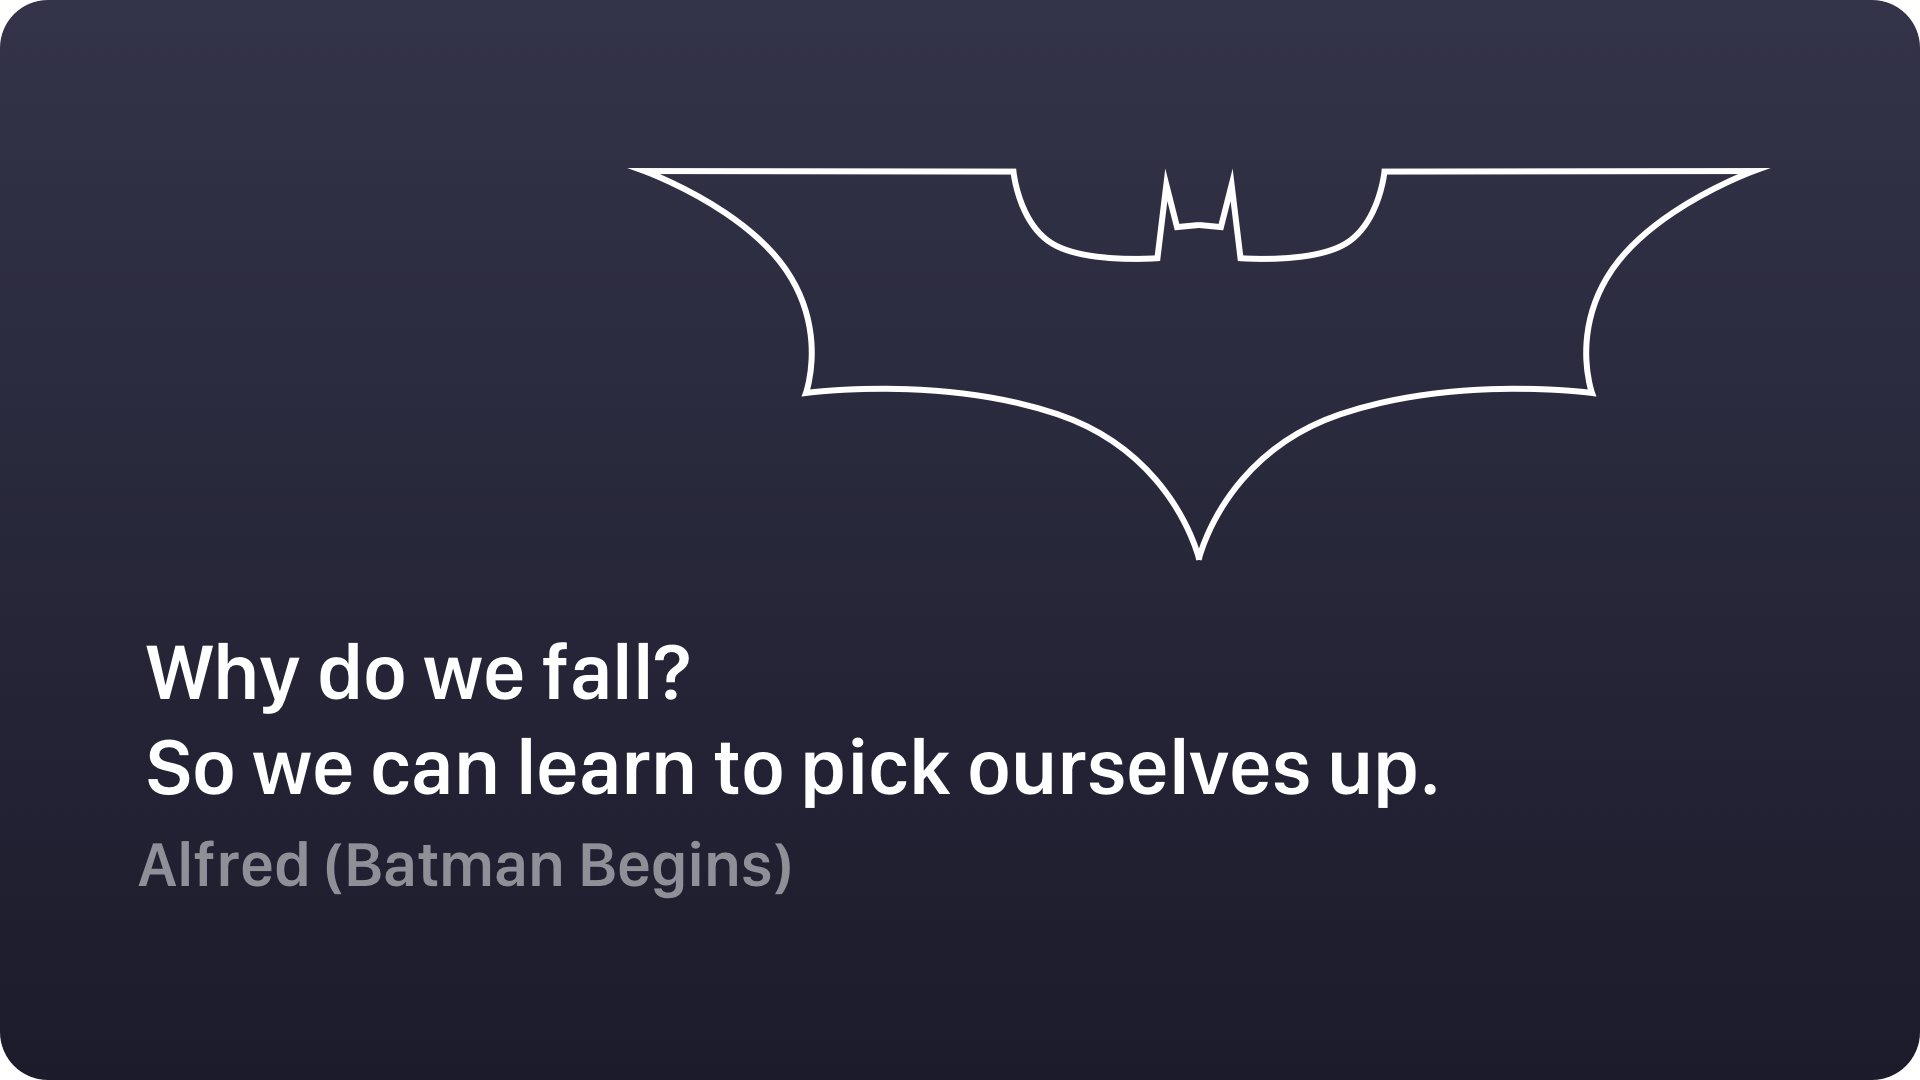 3 can we learn. Why do we Fall. Why do we Fall? So we can learn to pick ourselves up. Надпись Бэтмена в небе. Batman Motivation.